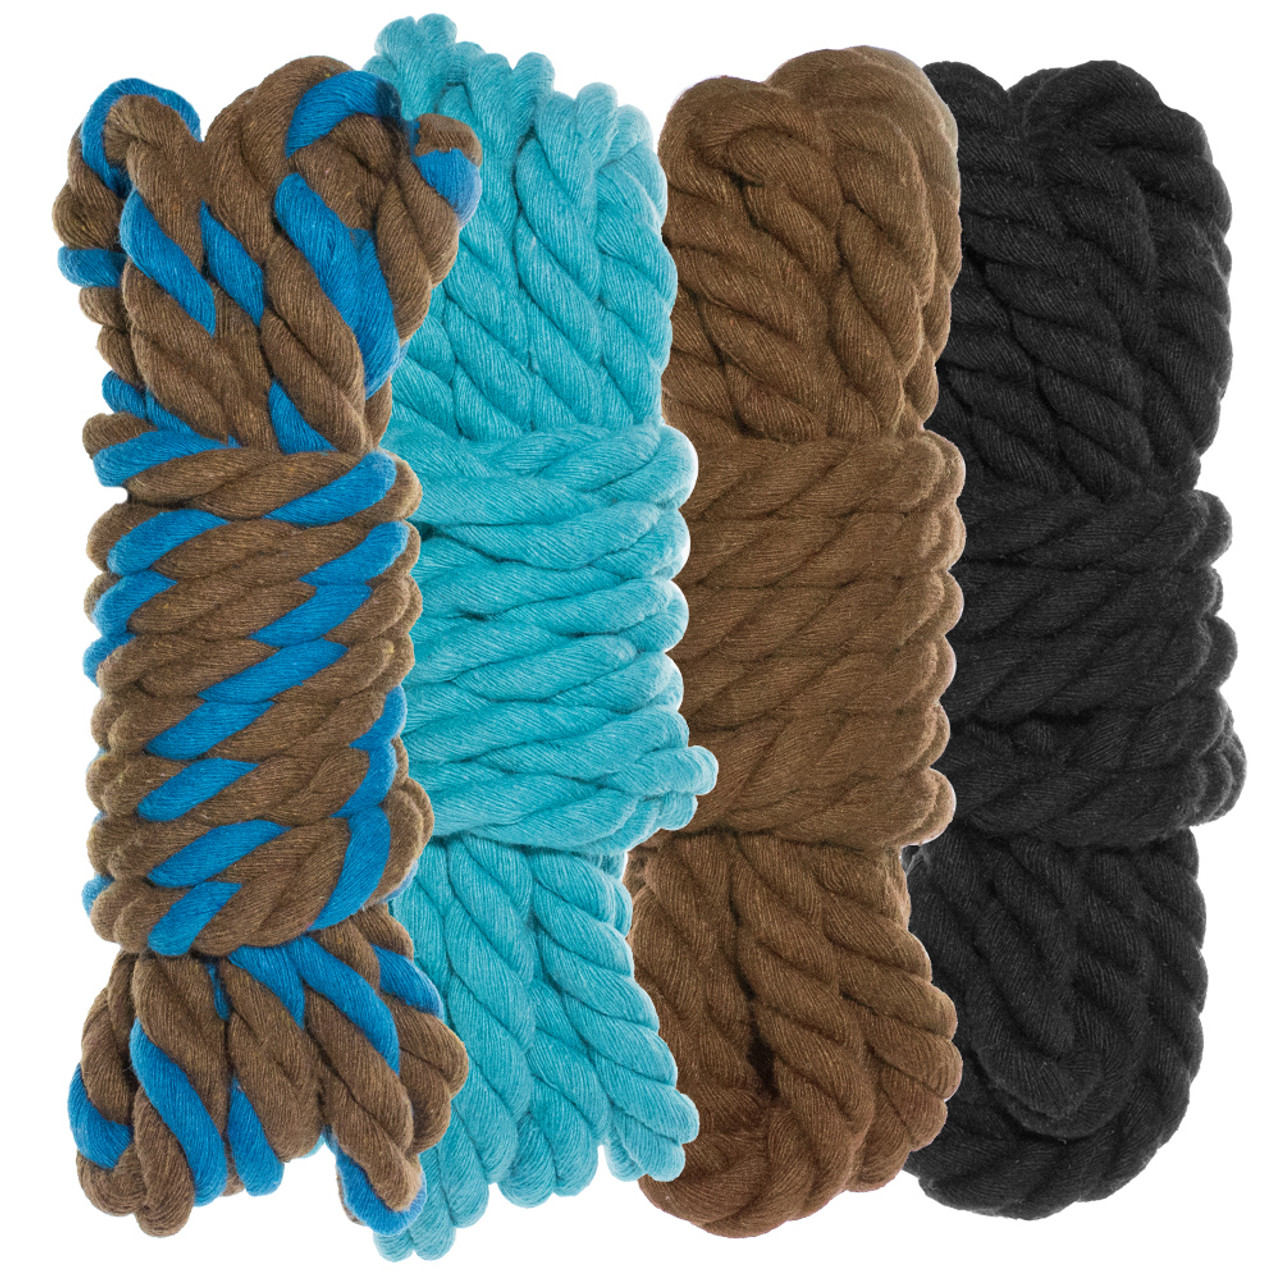 1/4 Twisted Cotton Rope Kit - Cookie Monster - 40